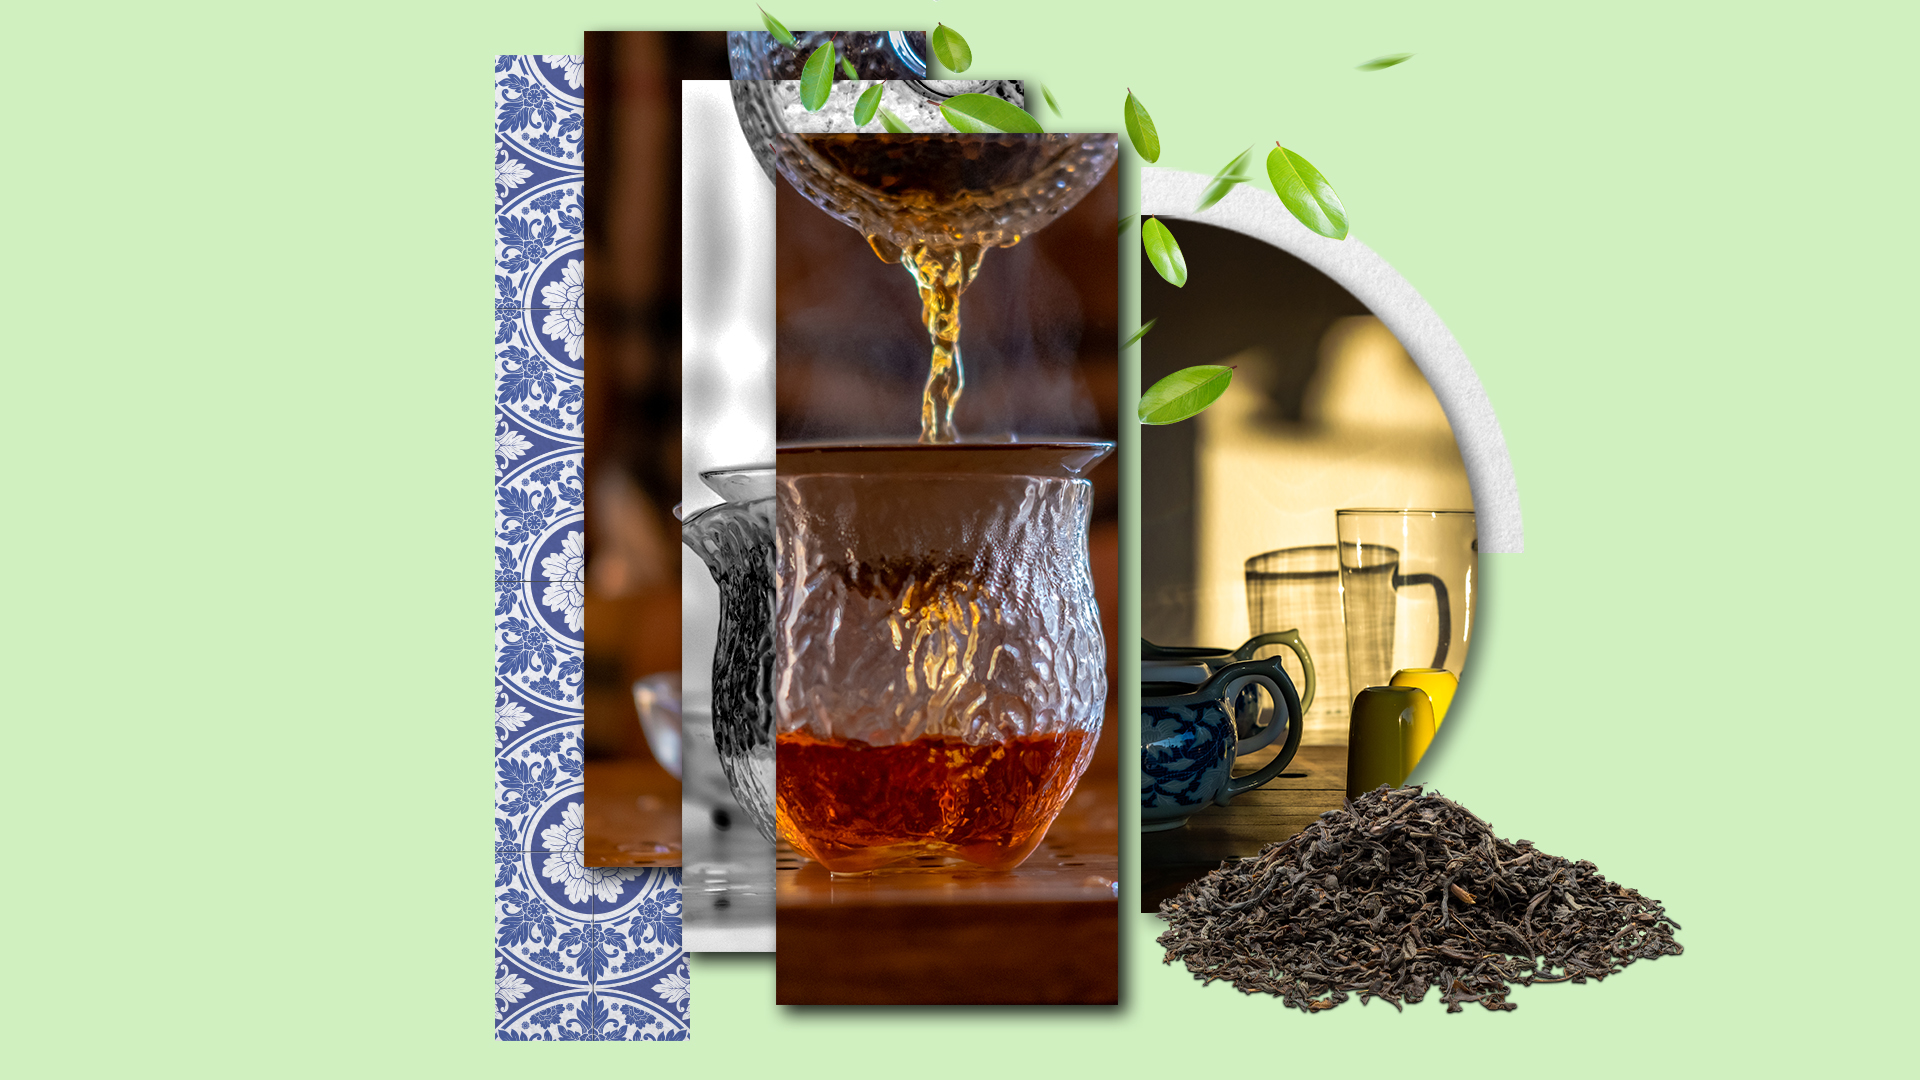 A modified image of poured tea with a green background.